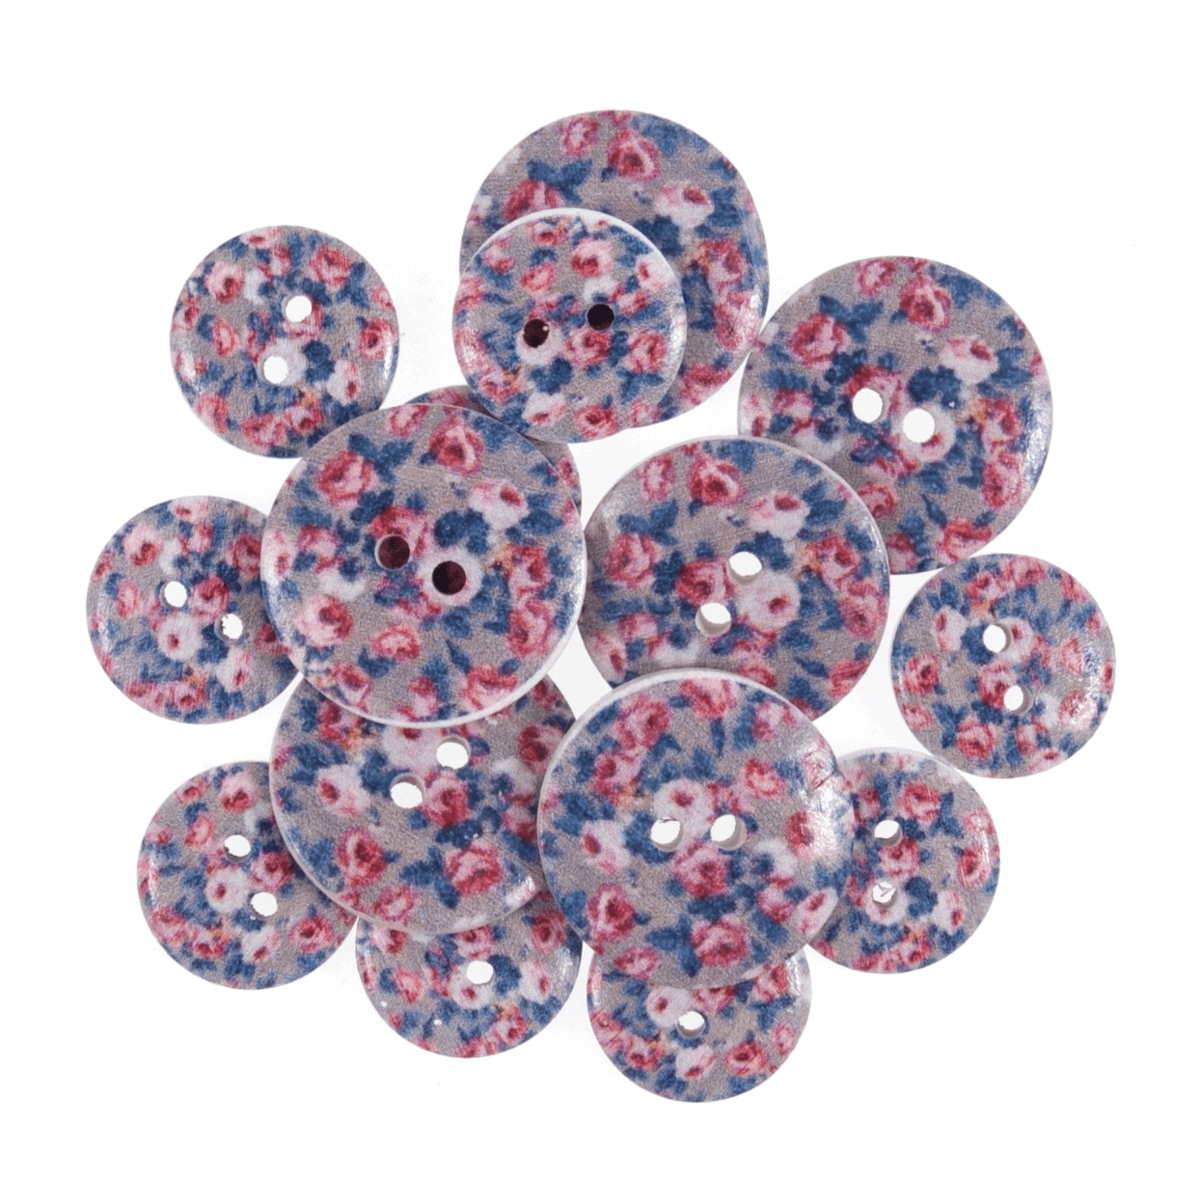 15 x Assorted Ditsy Grey Rose Wooden Craft Buttons 18mm - 25mm 